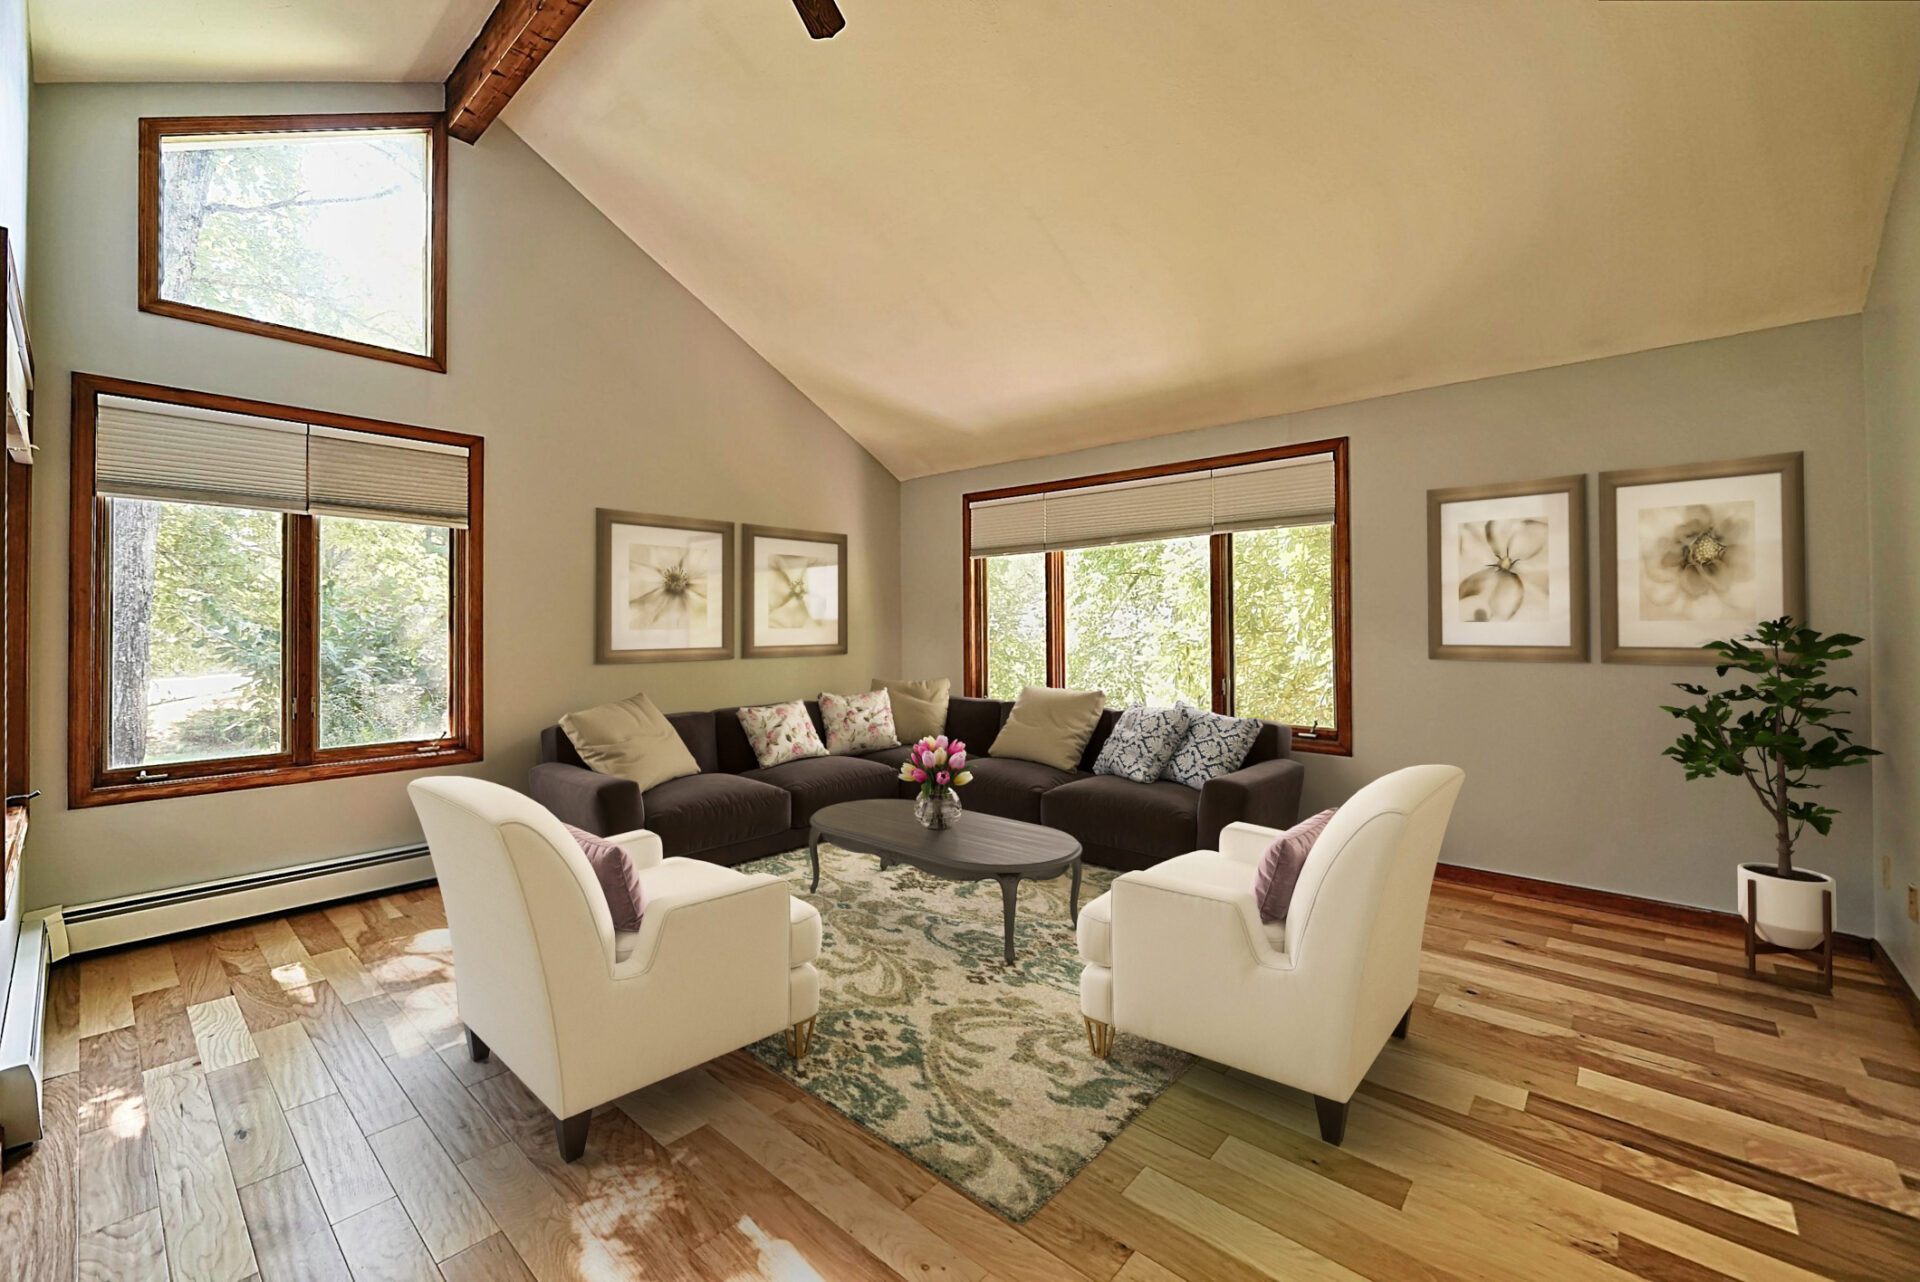 Image of living room in a ranch style home in Salem, NH.